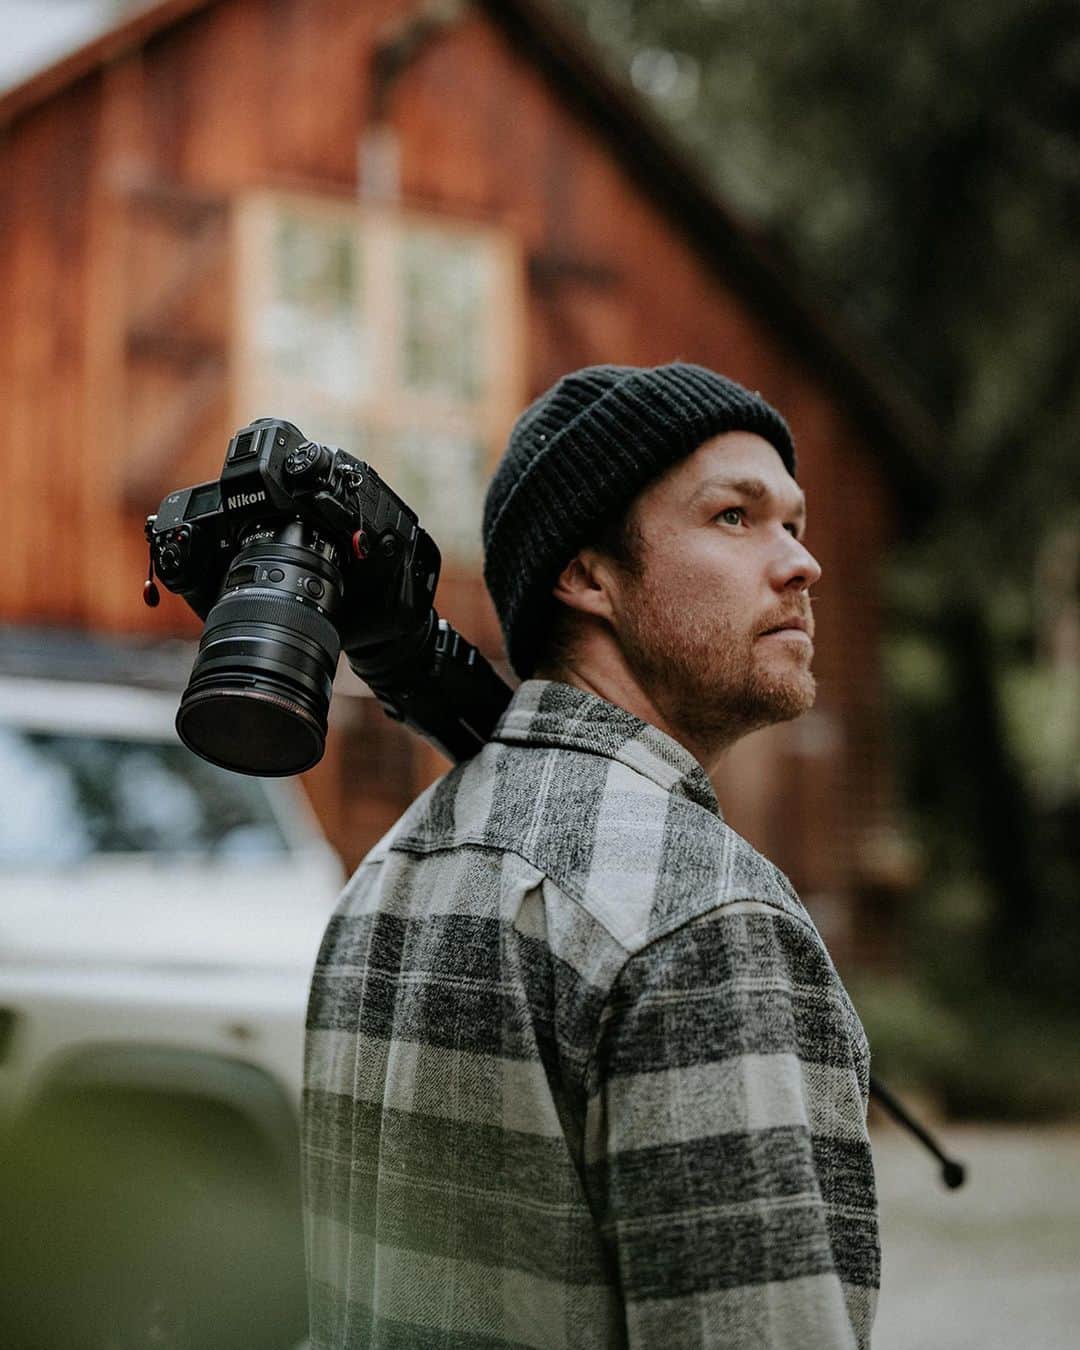 Nikon Australiaのインスタグラム：「Swipe to explore the Victorian wilderness with @andrewhardy and the Z 9.  “Up until the Z 9, if you wanted to capture 8K RAW video, you’re looking at a $30-40K camera. The advantage of the Z 9 isn’t only that it’s affordable, it’s its size.”  Read our Q&A with Andy as we discuss filmmaking, photography and the Z 9 via nikon.com.au/news  #Nikon #NikonAustralia #Z9 #Mirrorless #VIC #Victoria #Australia #Travel #Adventure #Riparide」